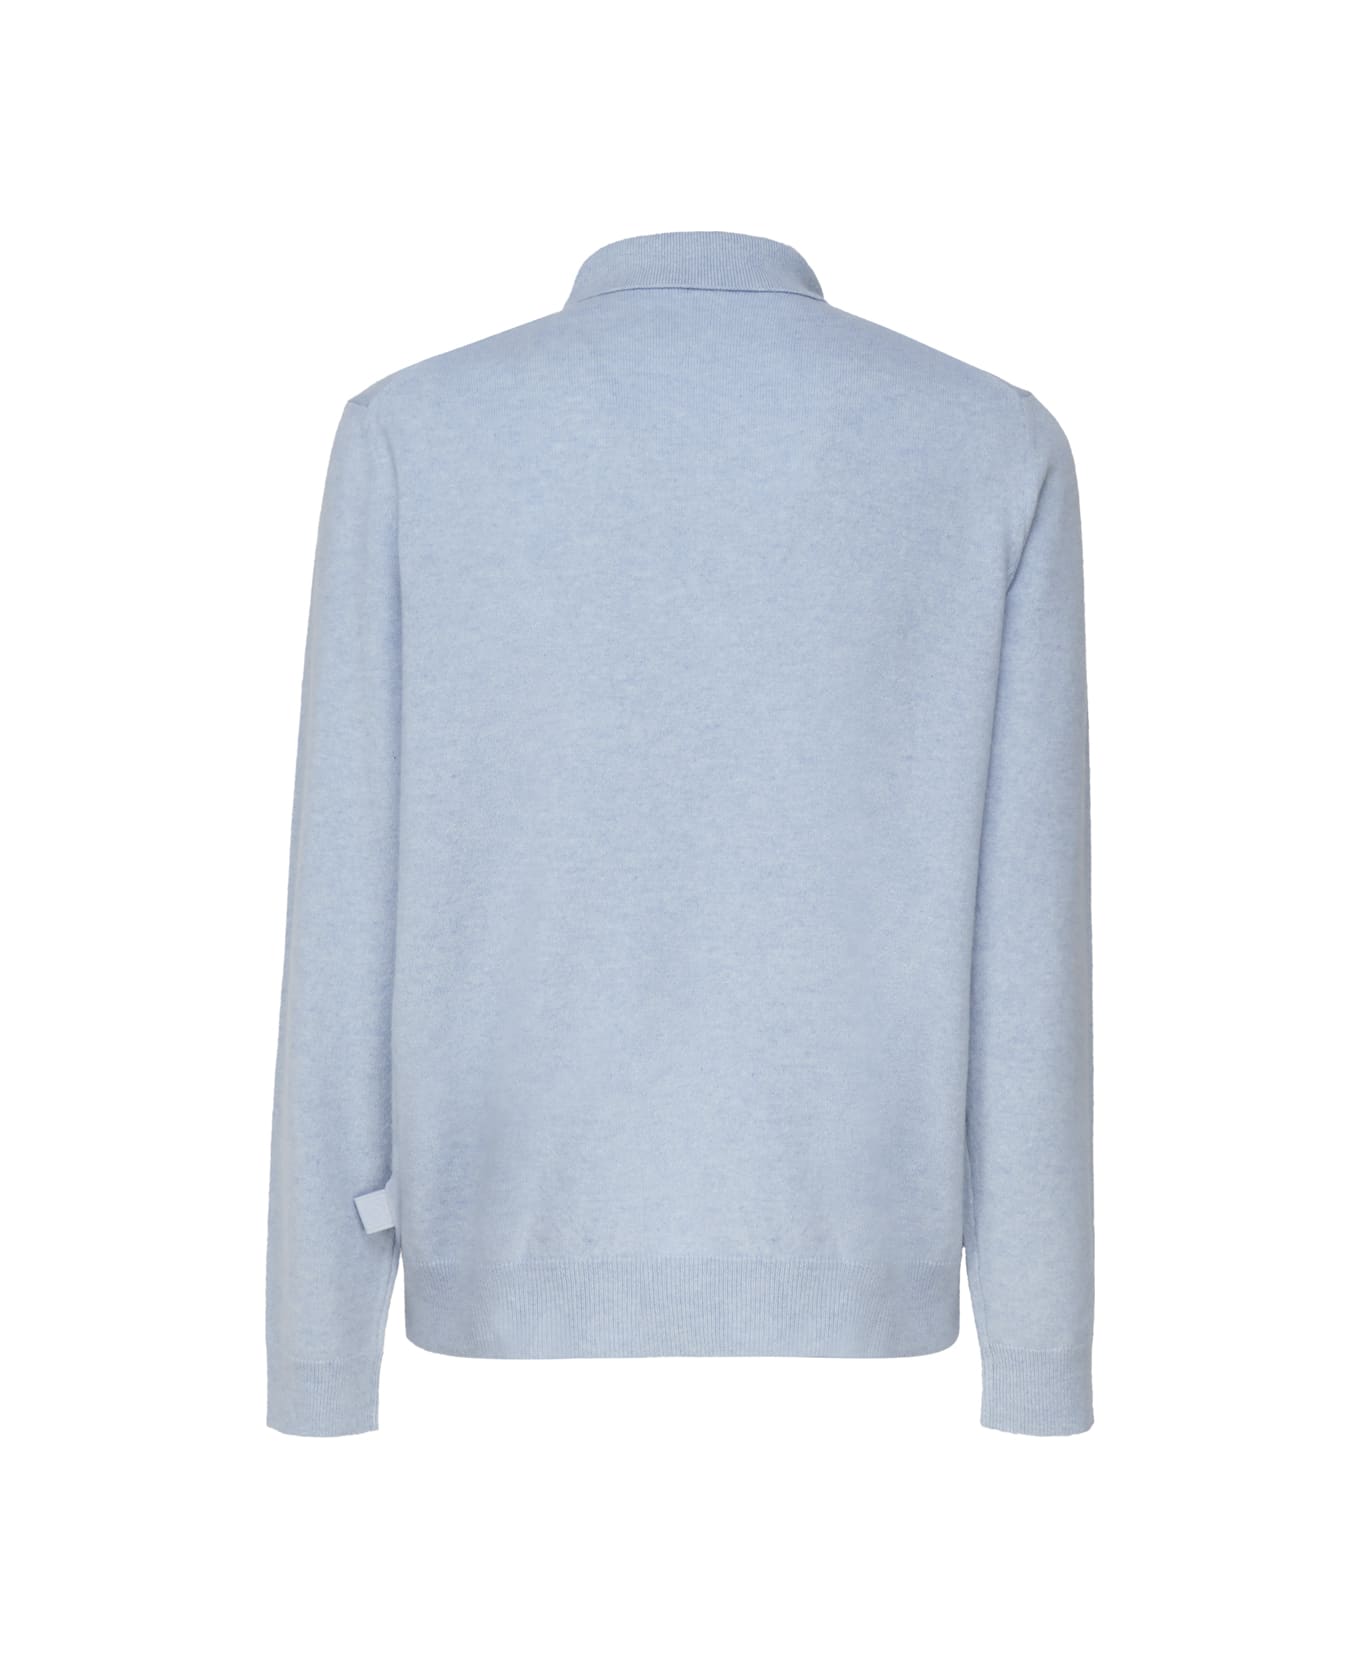 Loewe Polo Sweater In Soft Cashmere - Light blue ポロシャツ